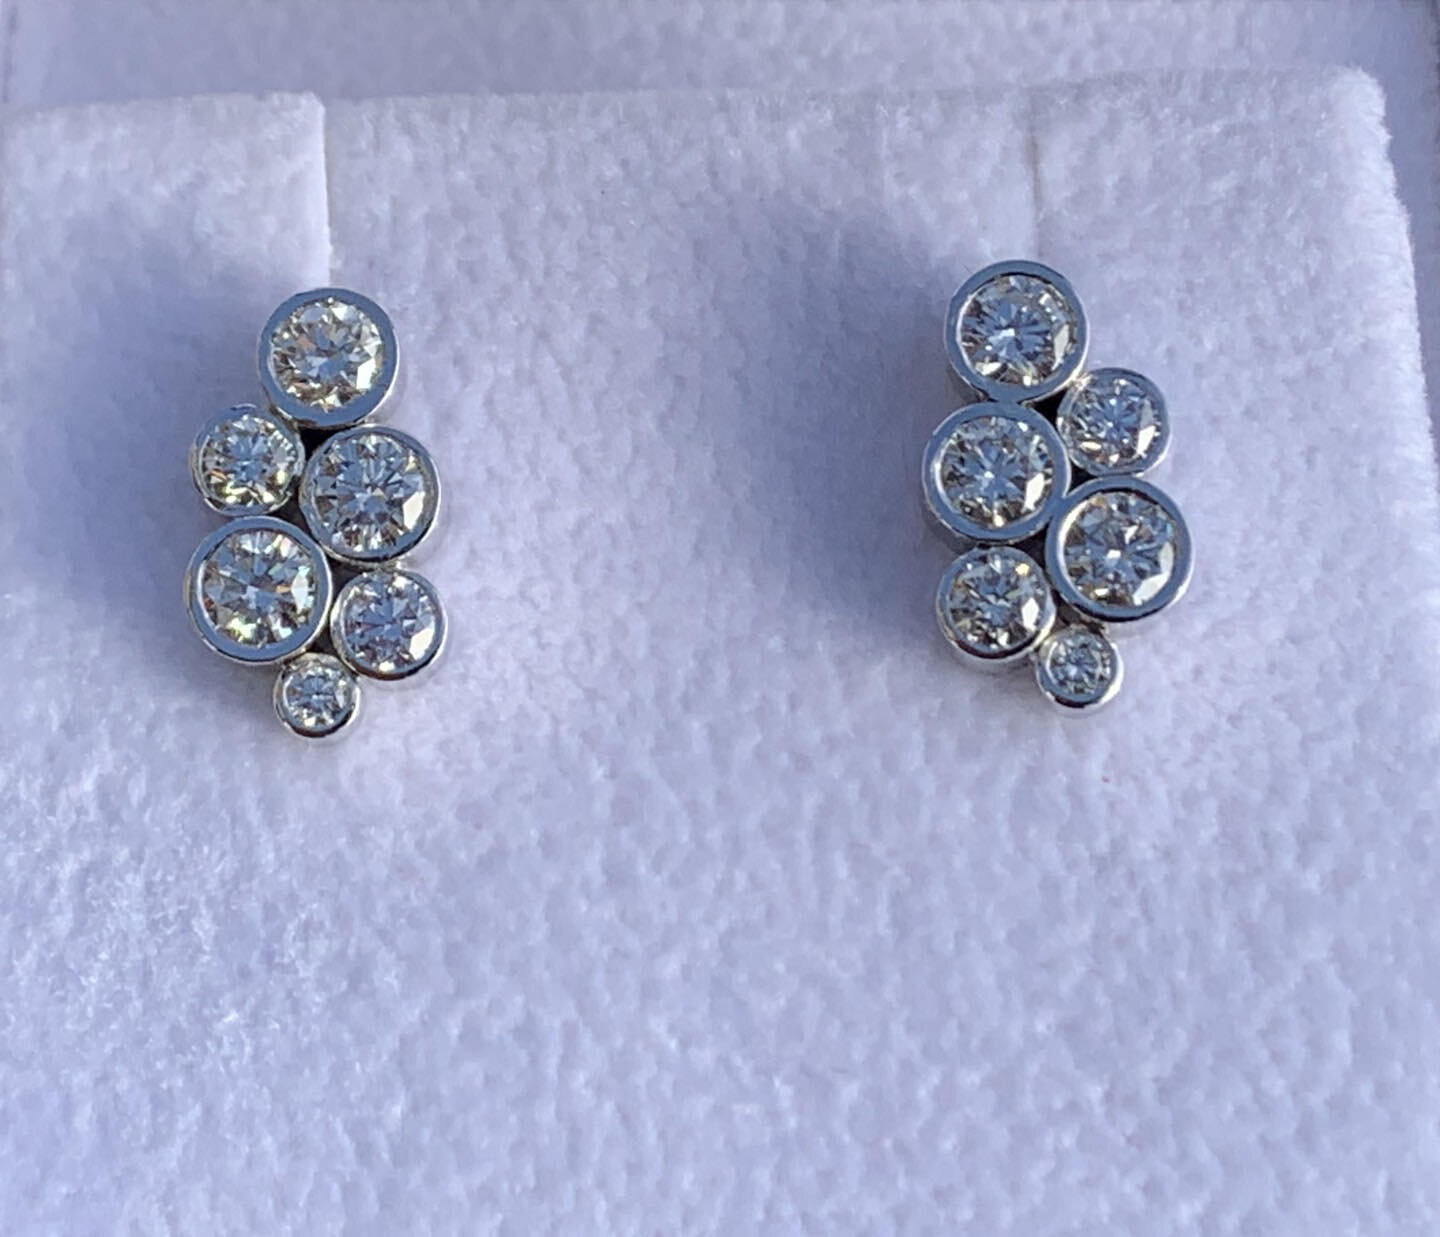 Platinum and diamond earrings. Over 1 ct each .